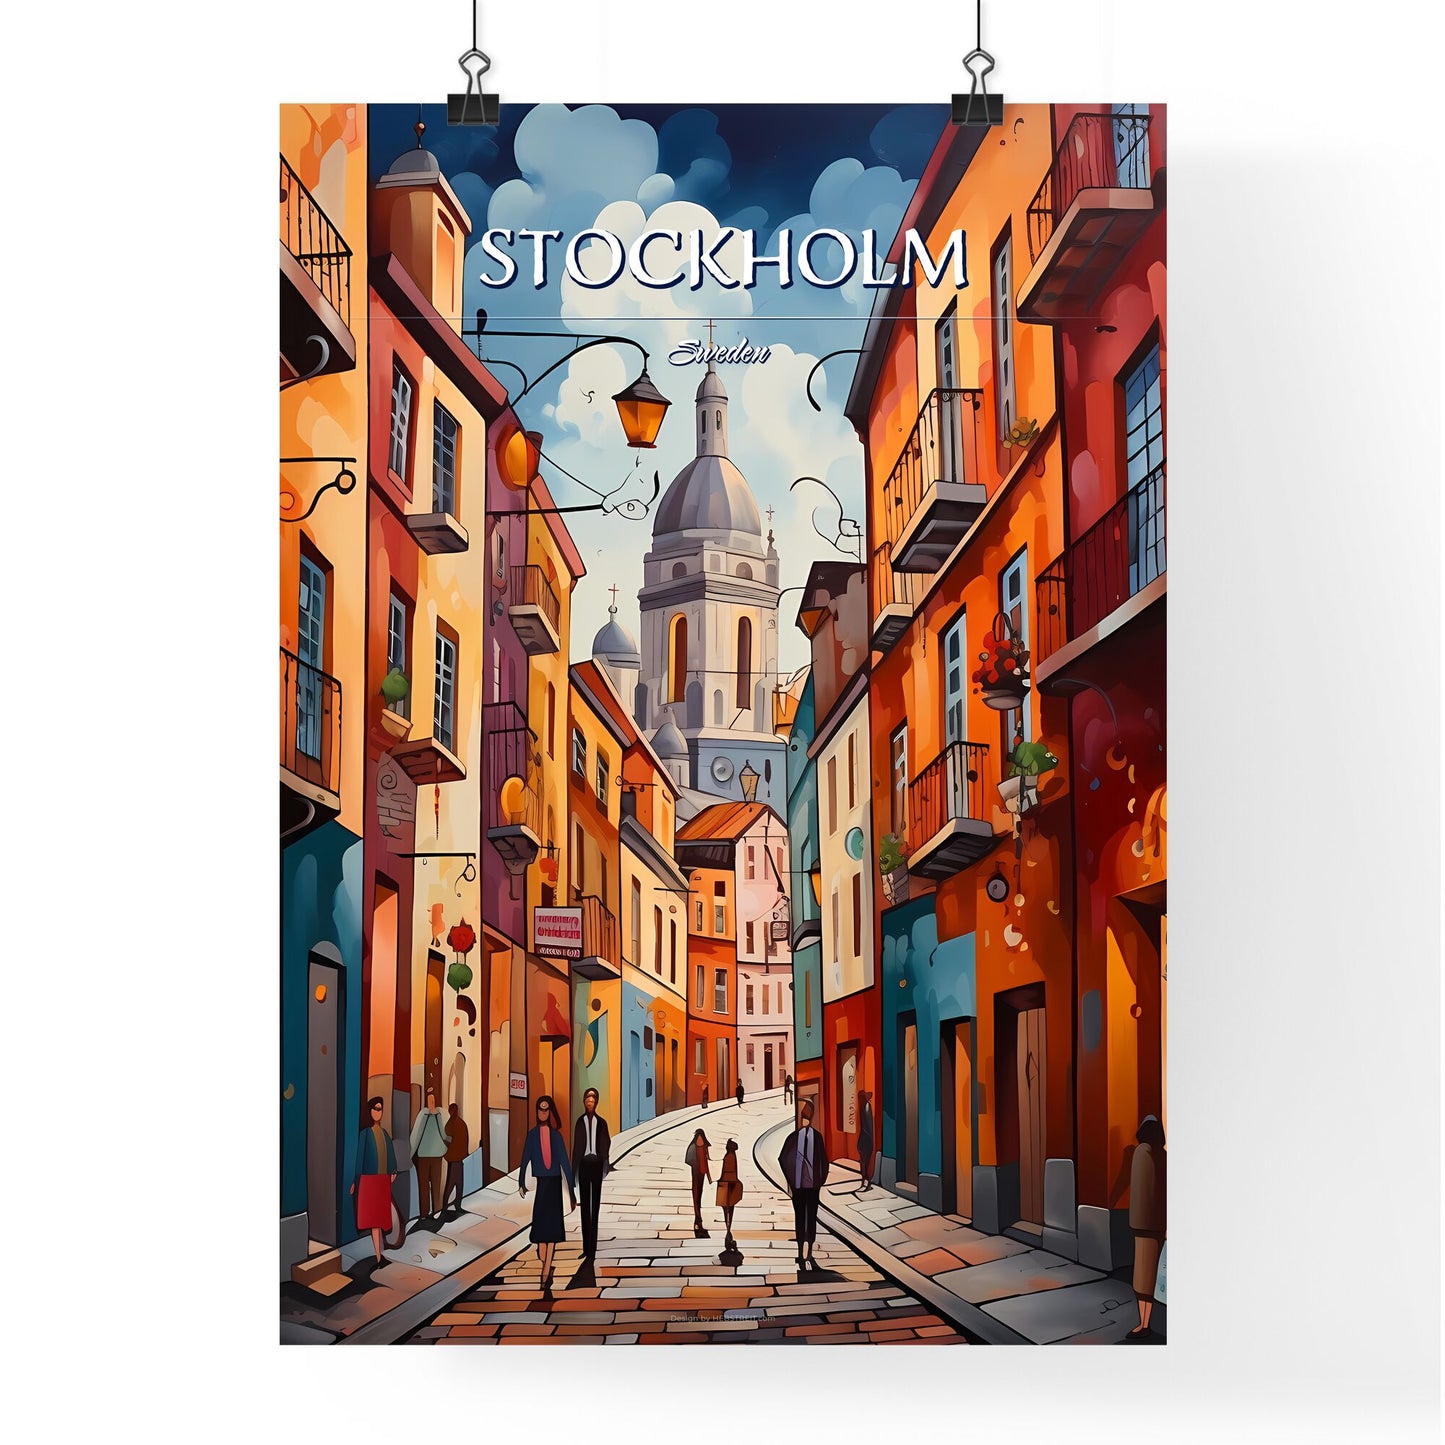 Stockholm, Sweden, - Art print of a man walking on a bridge over a river with a bridge and buildings Default Title